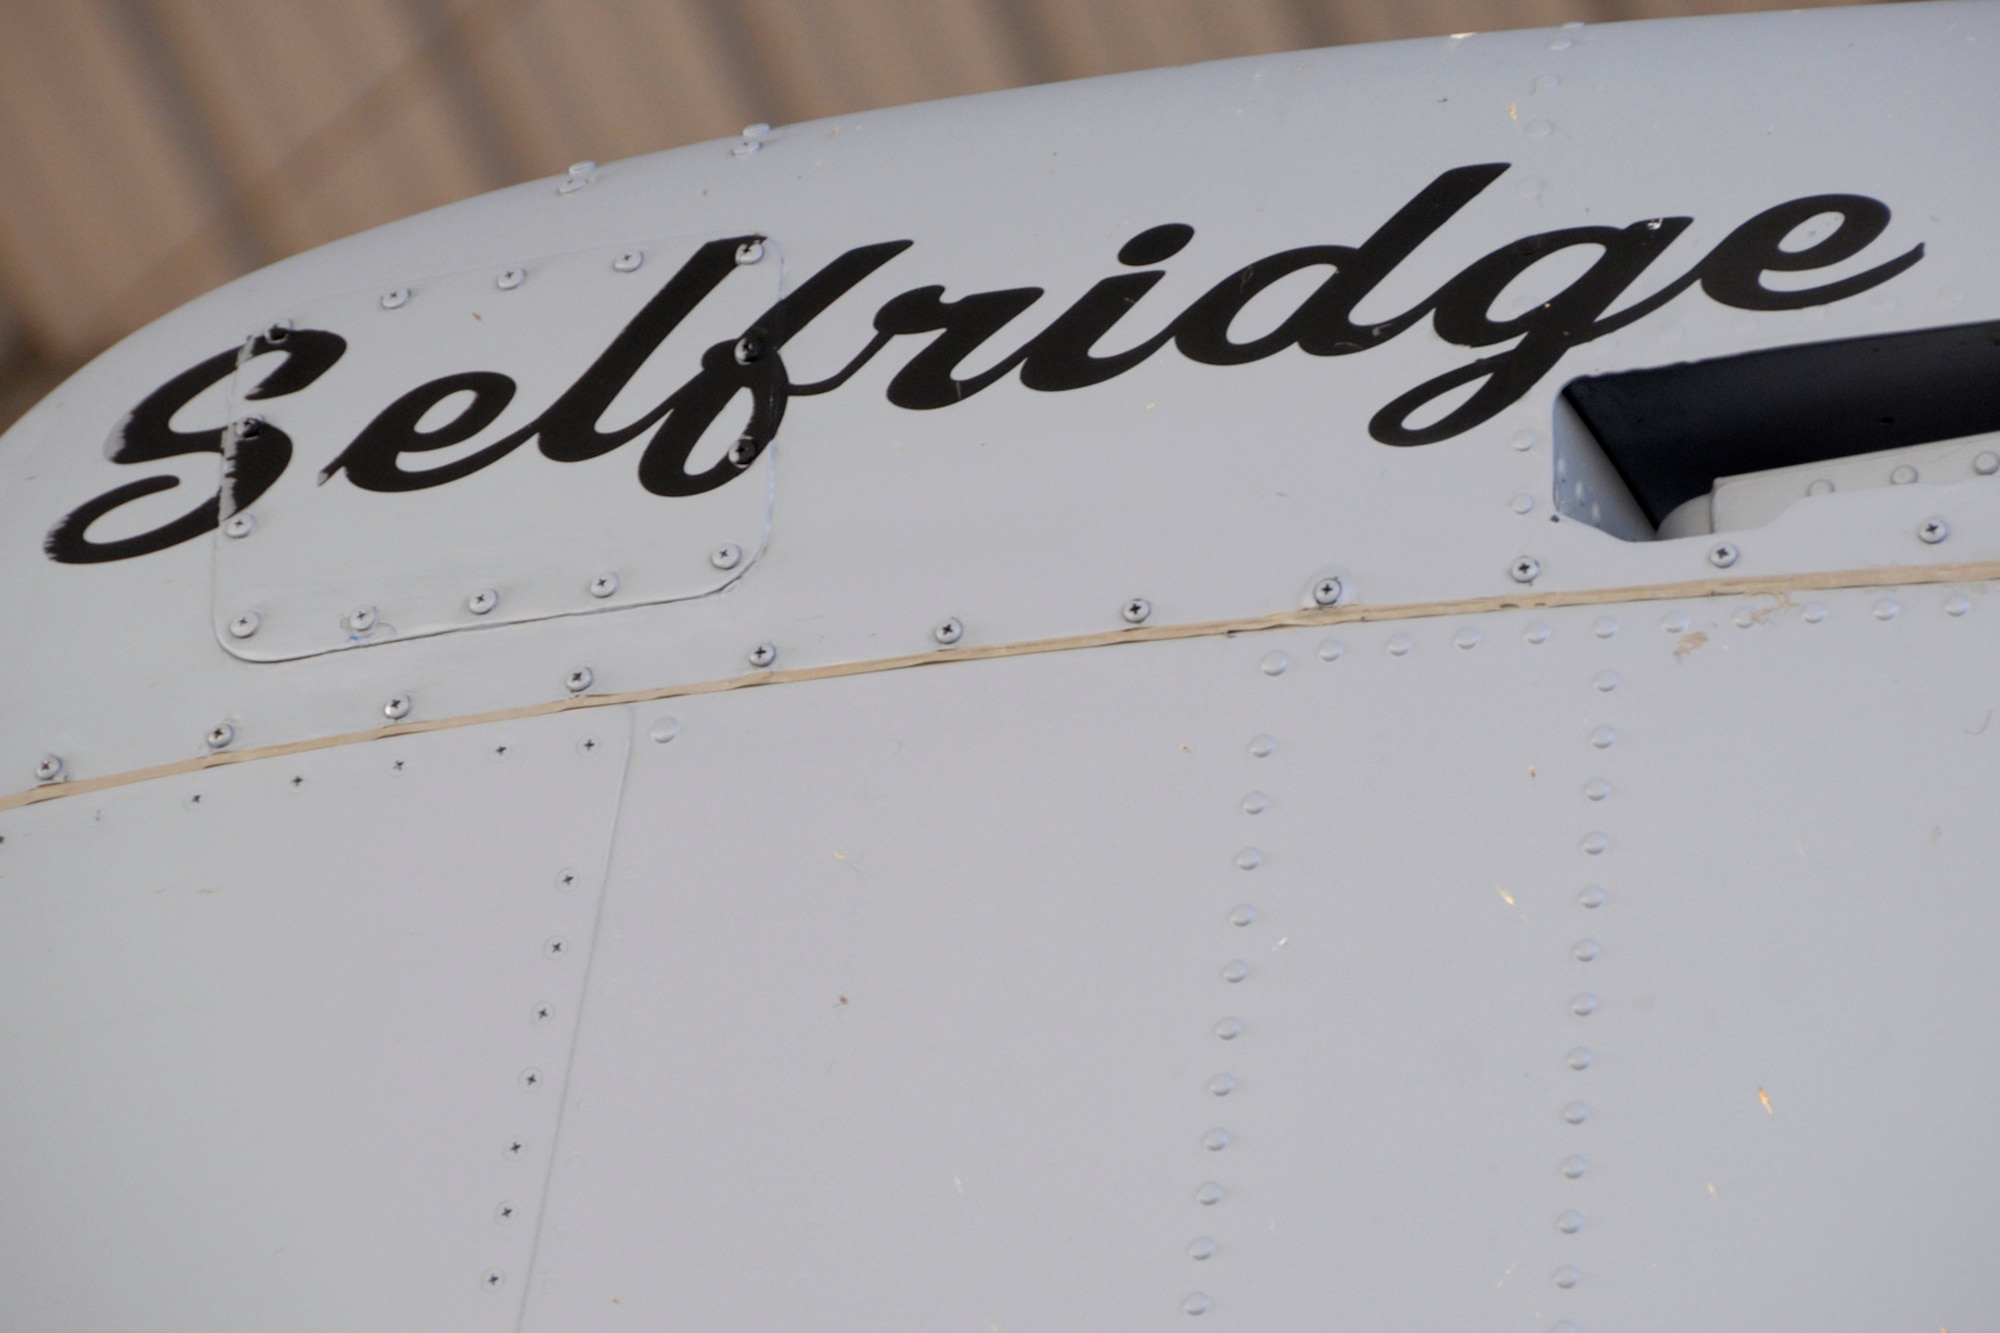 The name “Selfridge” graces the top engine cover on an A-10 Thunderbolt II based at Selfridge Air National Guard Base, Mich. Such markings on the aircraft help build unit esprit de corps. This A-10 is flown by the 107th Fighter Squadron and maintained by the 127th Maintenance Group. (Air National Guard photo by Brittani Baisden)